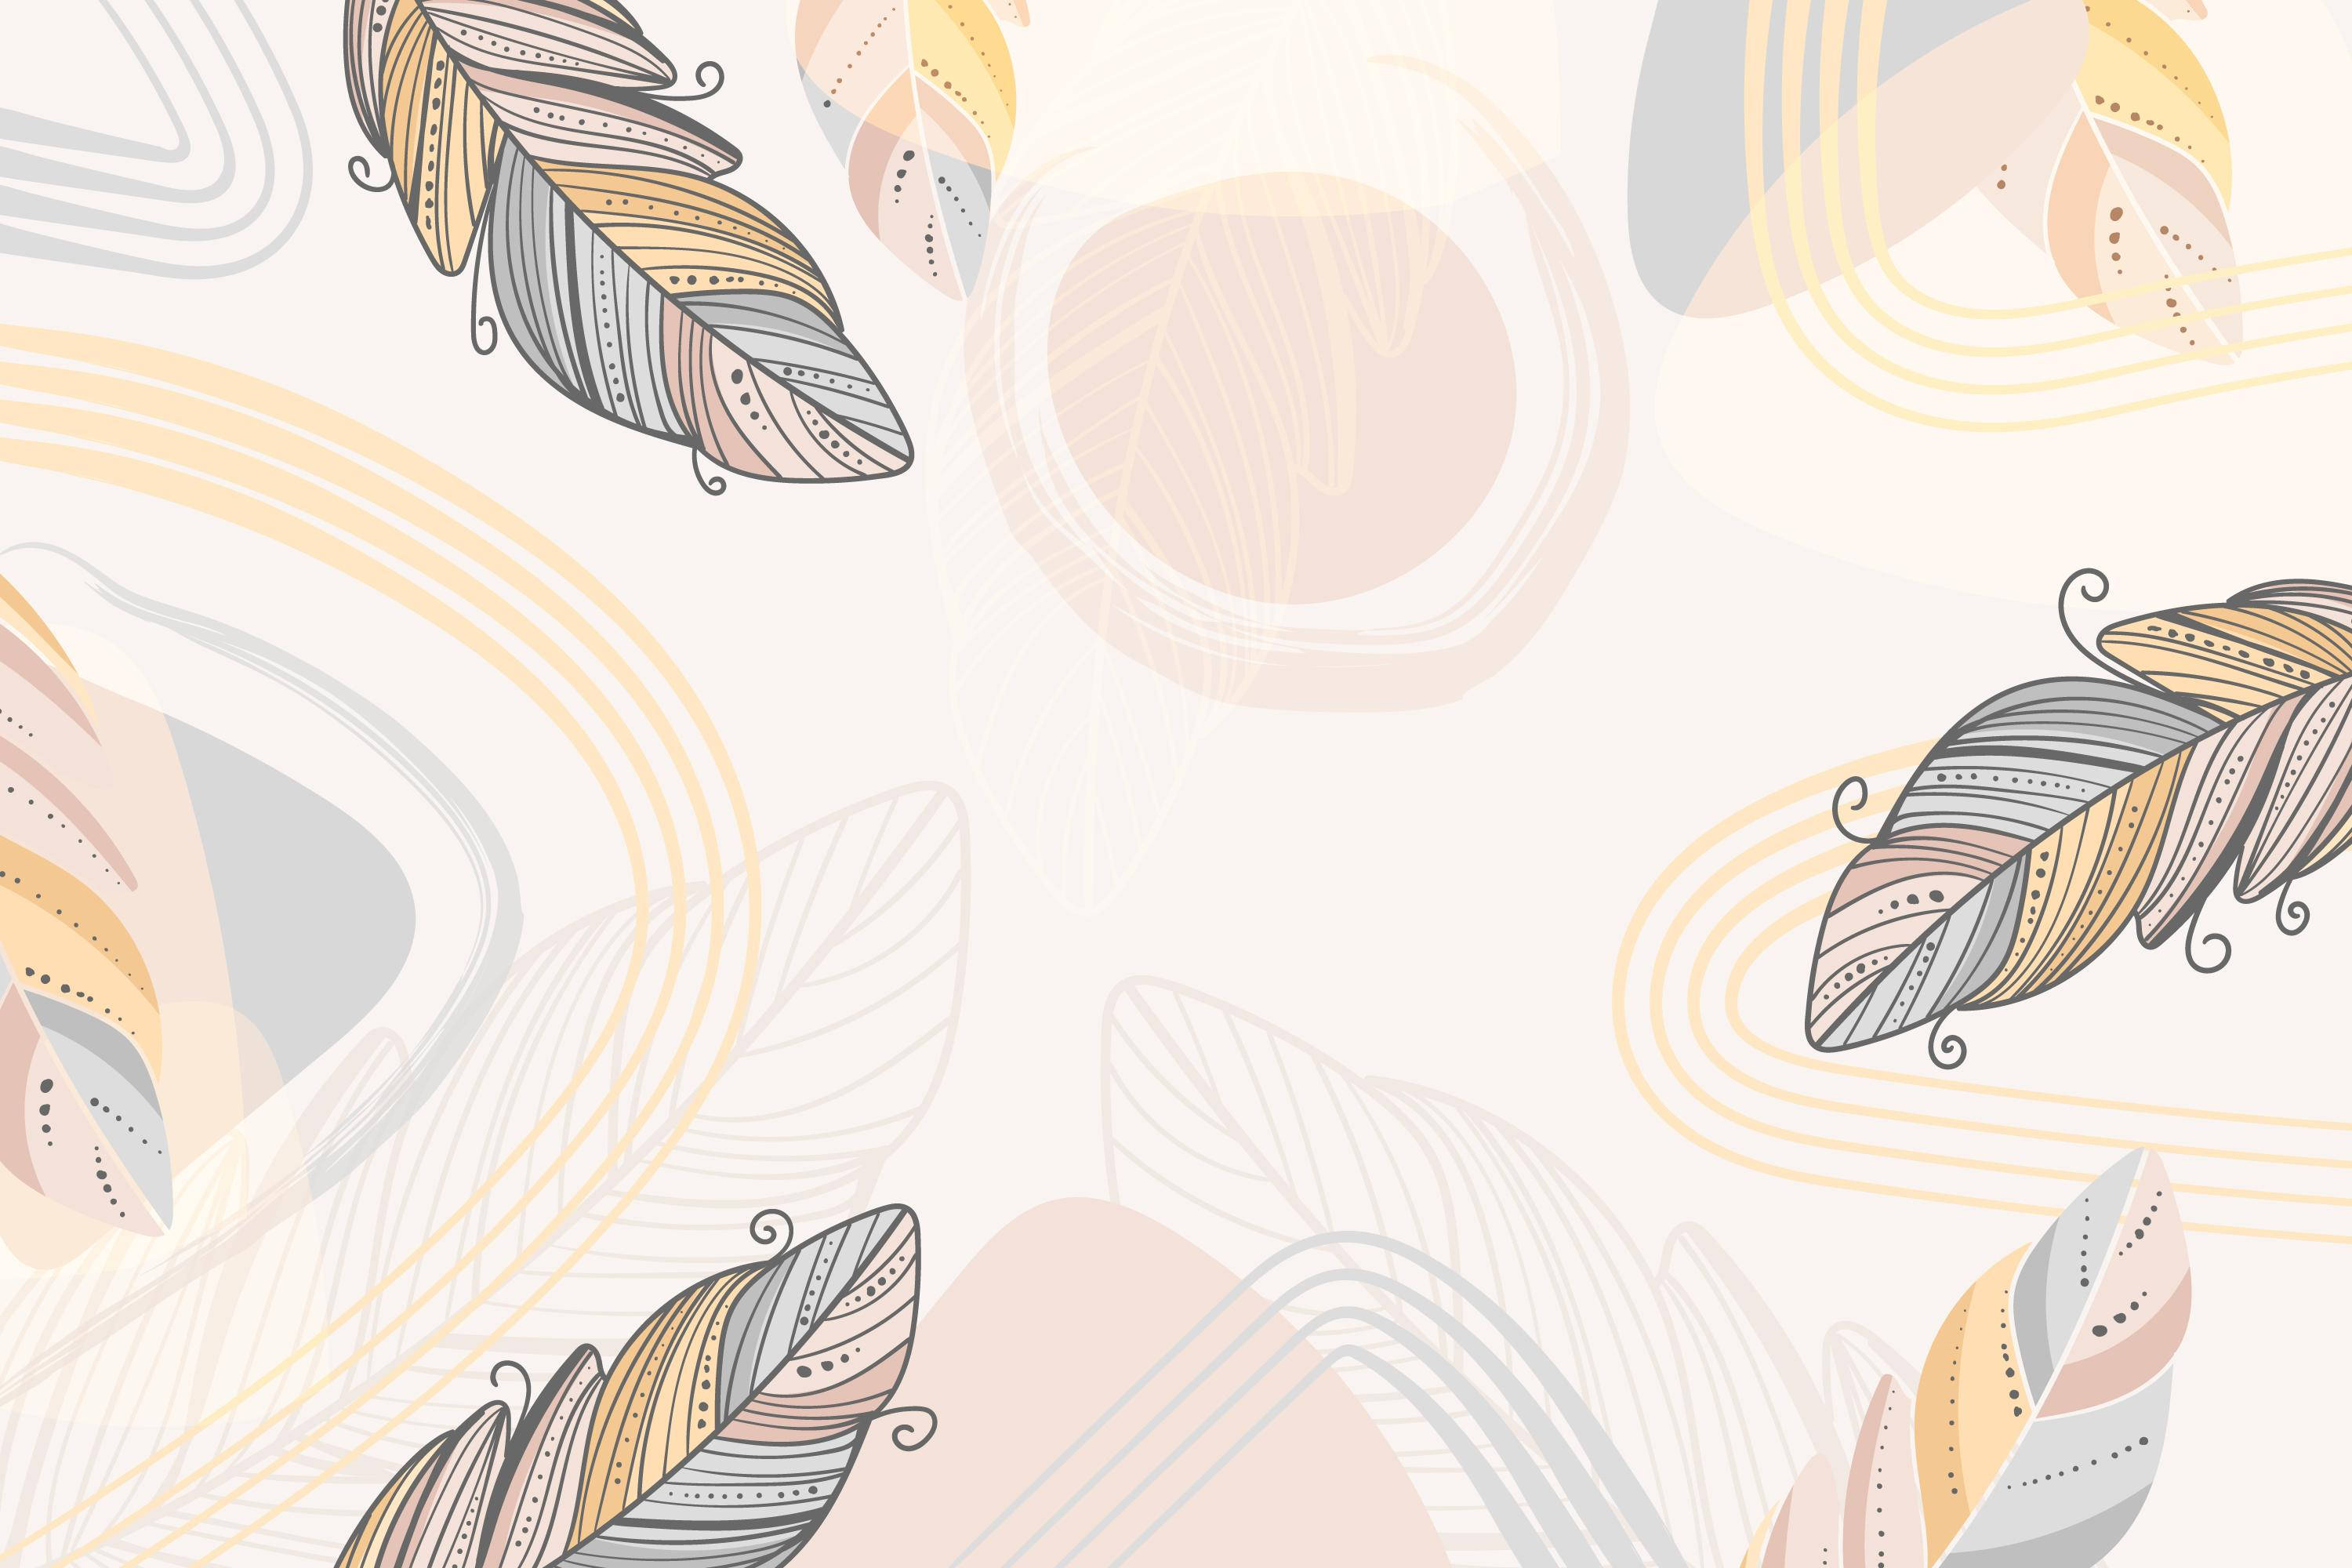 A pattern of feathers and lines - Boho